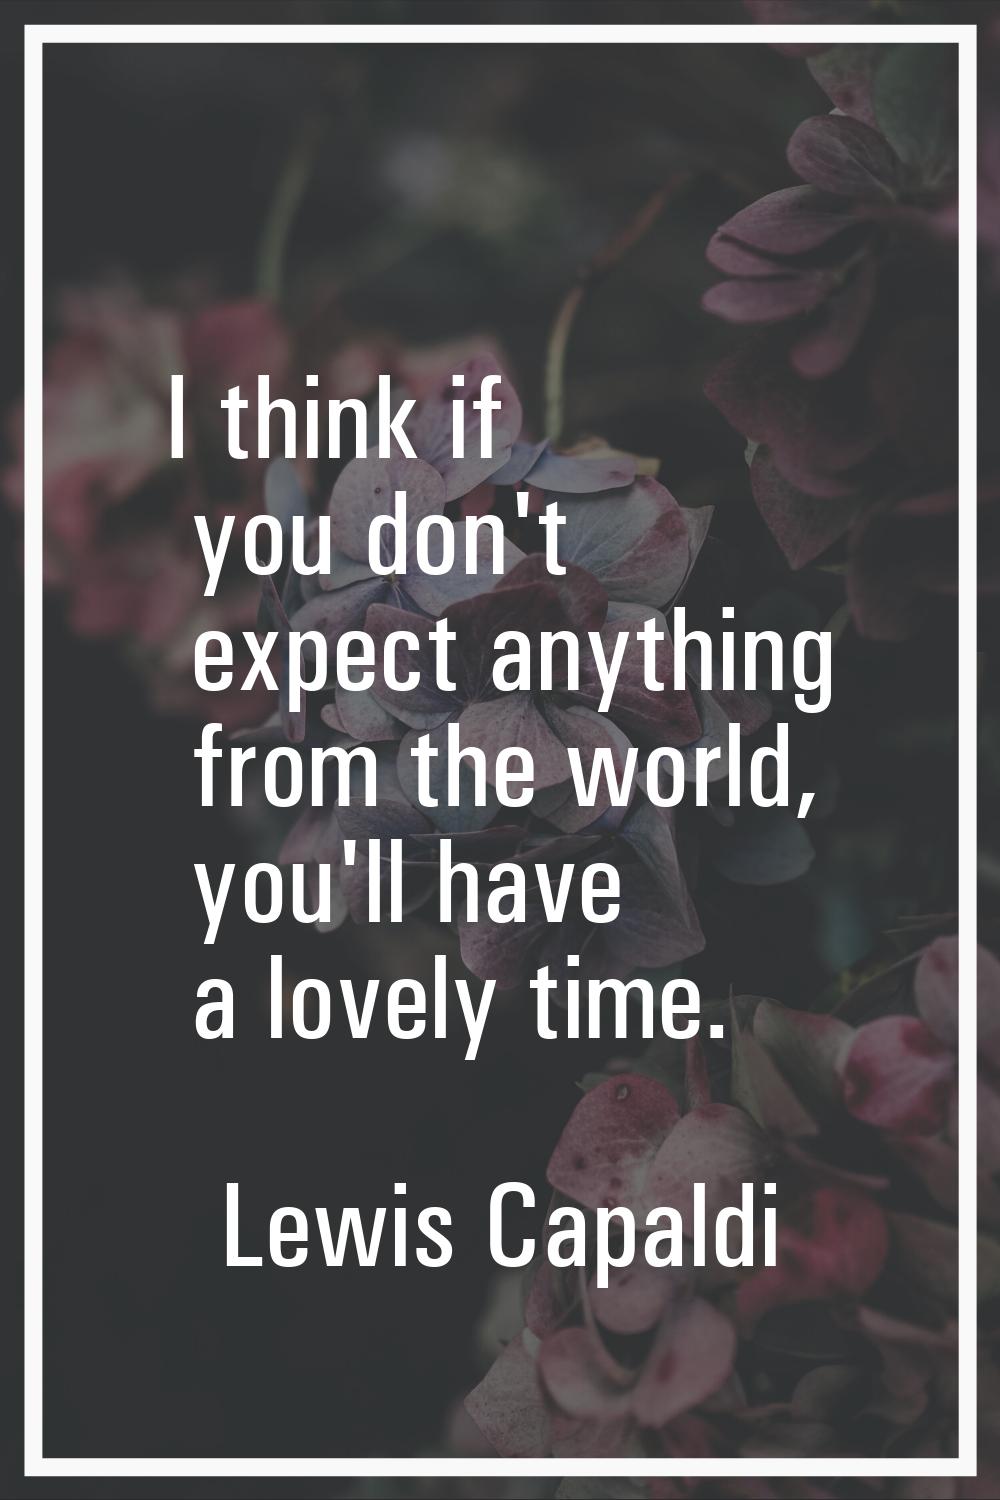 I think if you don't expect anything from the world, you'll have a lovely time.